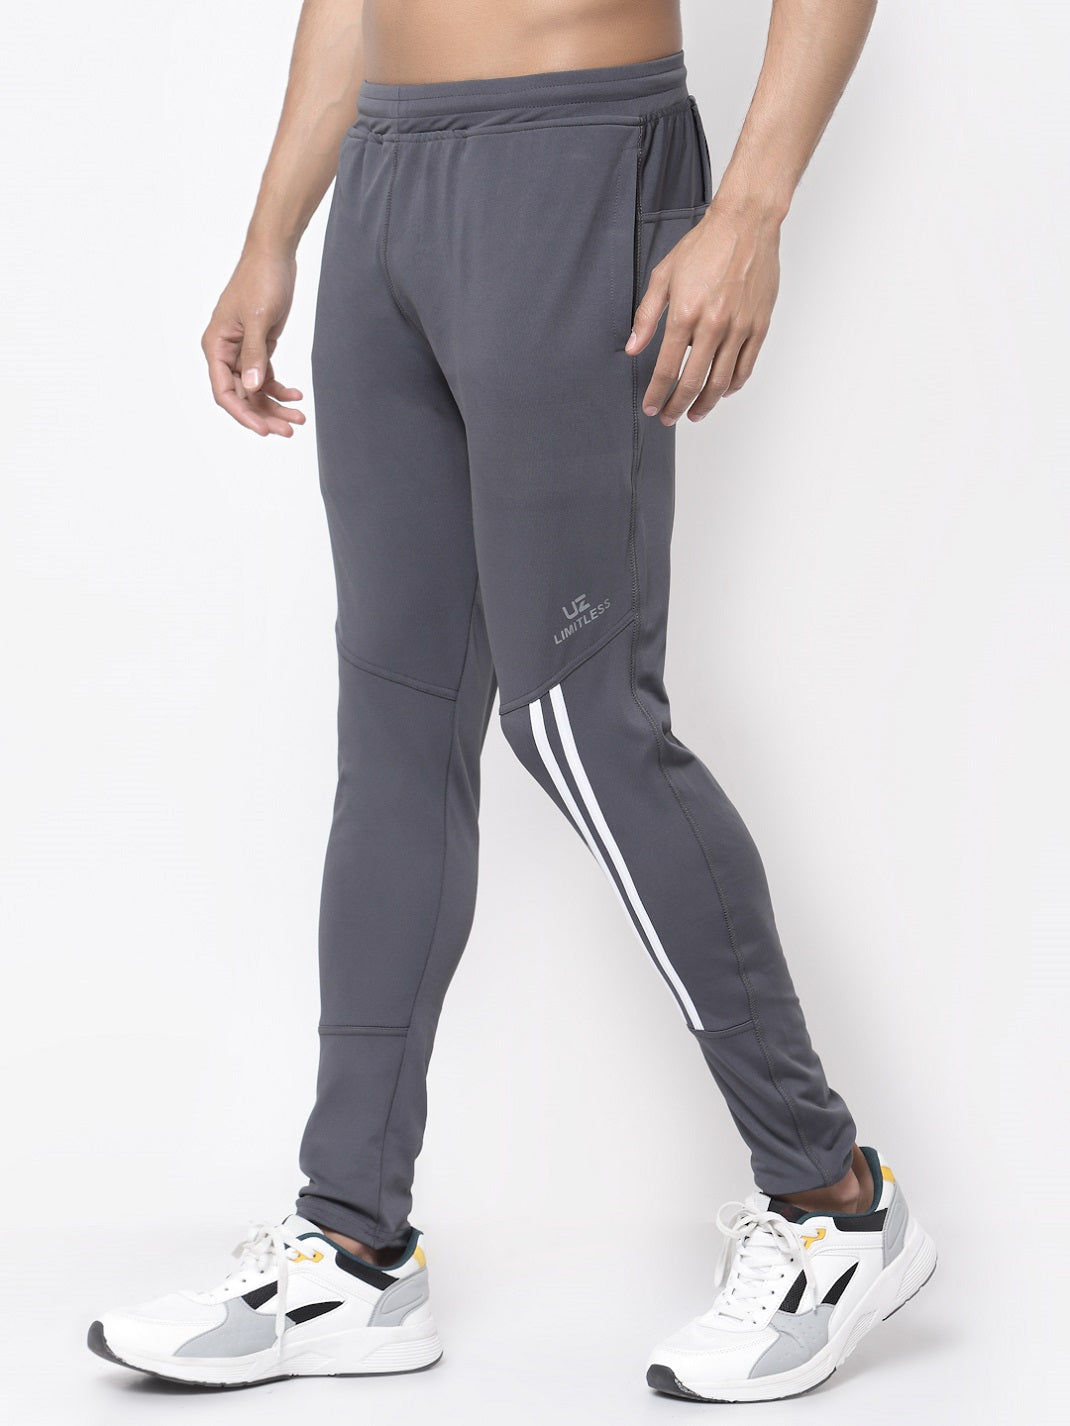 JOLGER Men's Solid Elasticated Gym Track Pants Grey : Amazon.in: Clothing &  Accessories